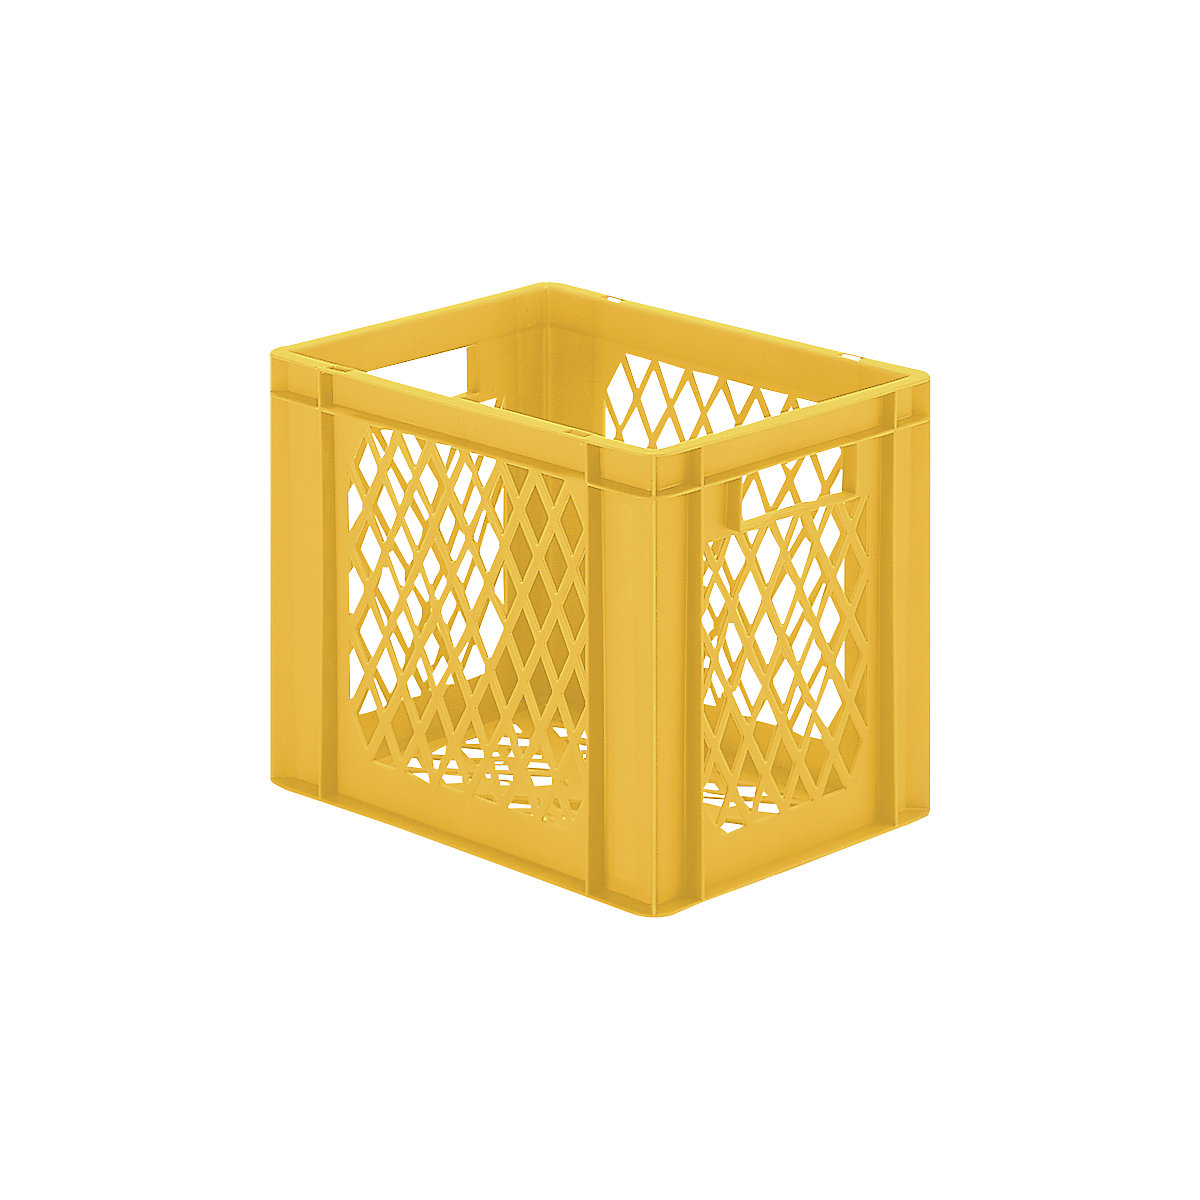 Euro stacking container, perforated walls and base, LxWxH 400 x 300 x 320 mm, yellow, pack of 5